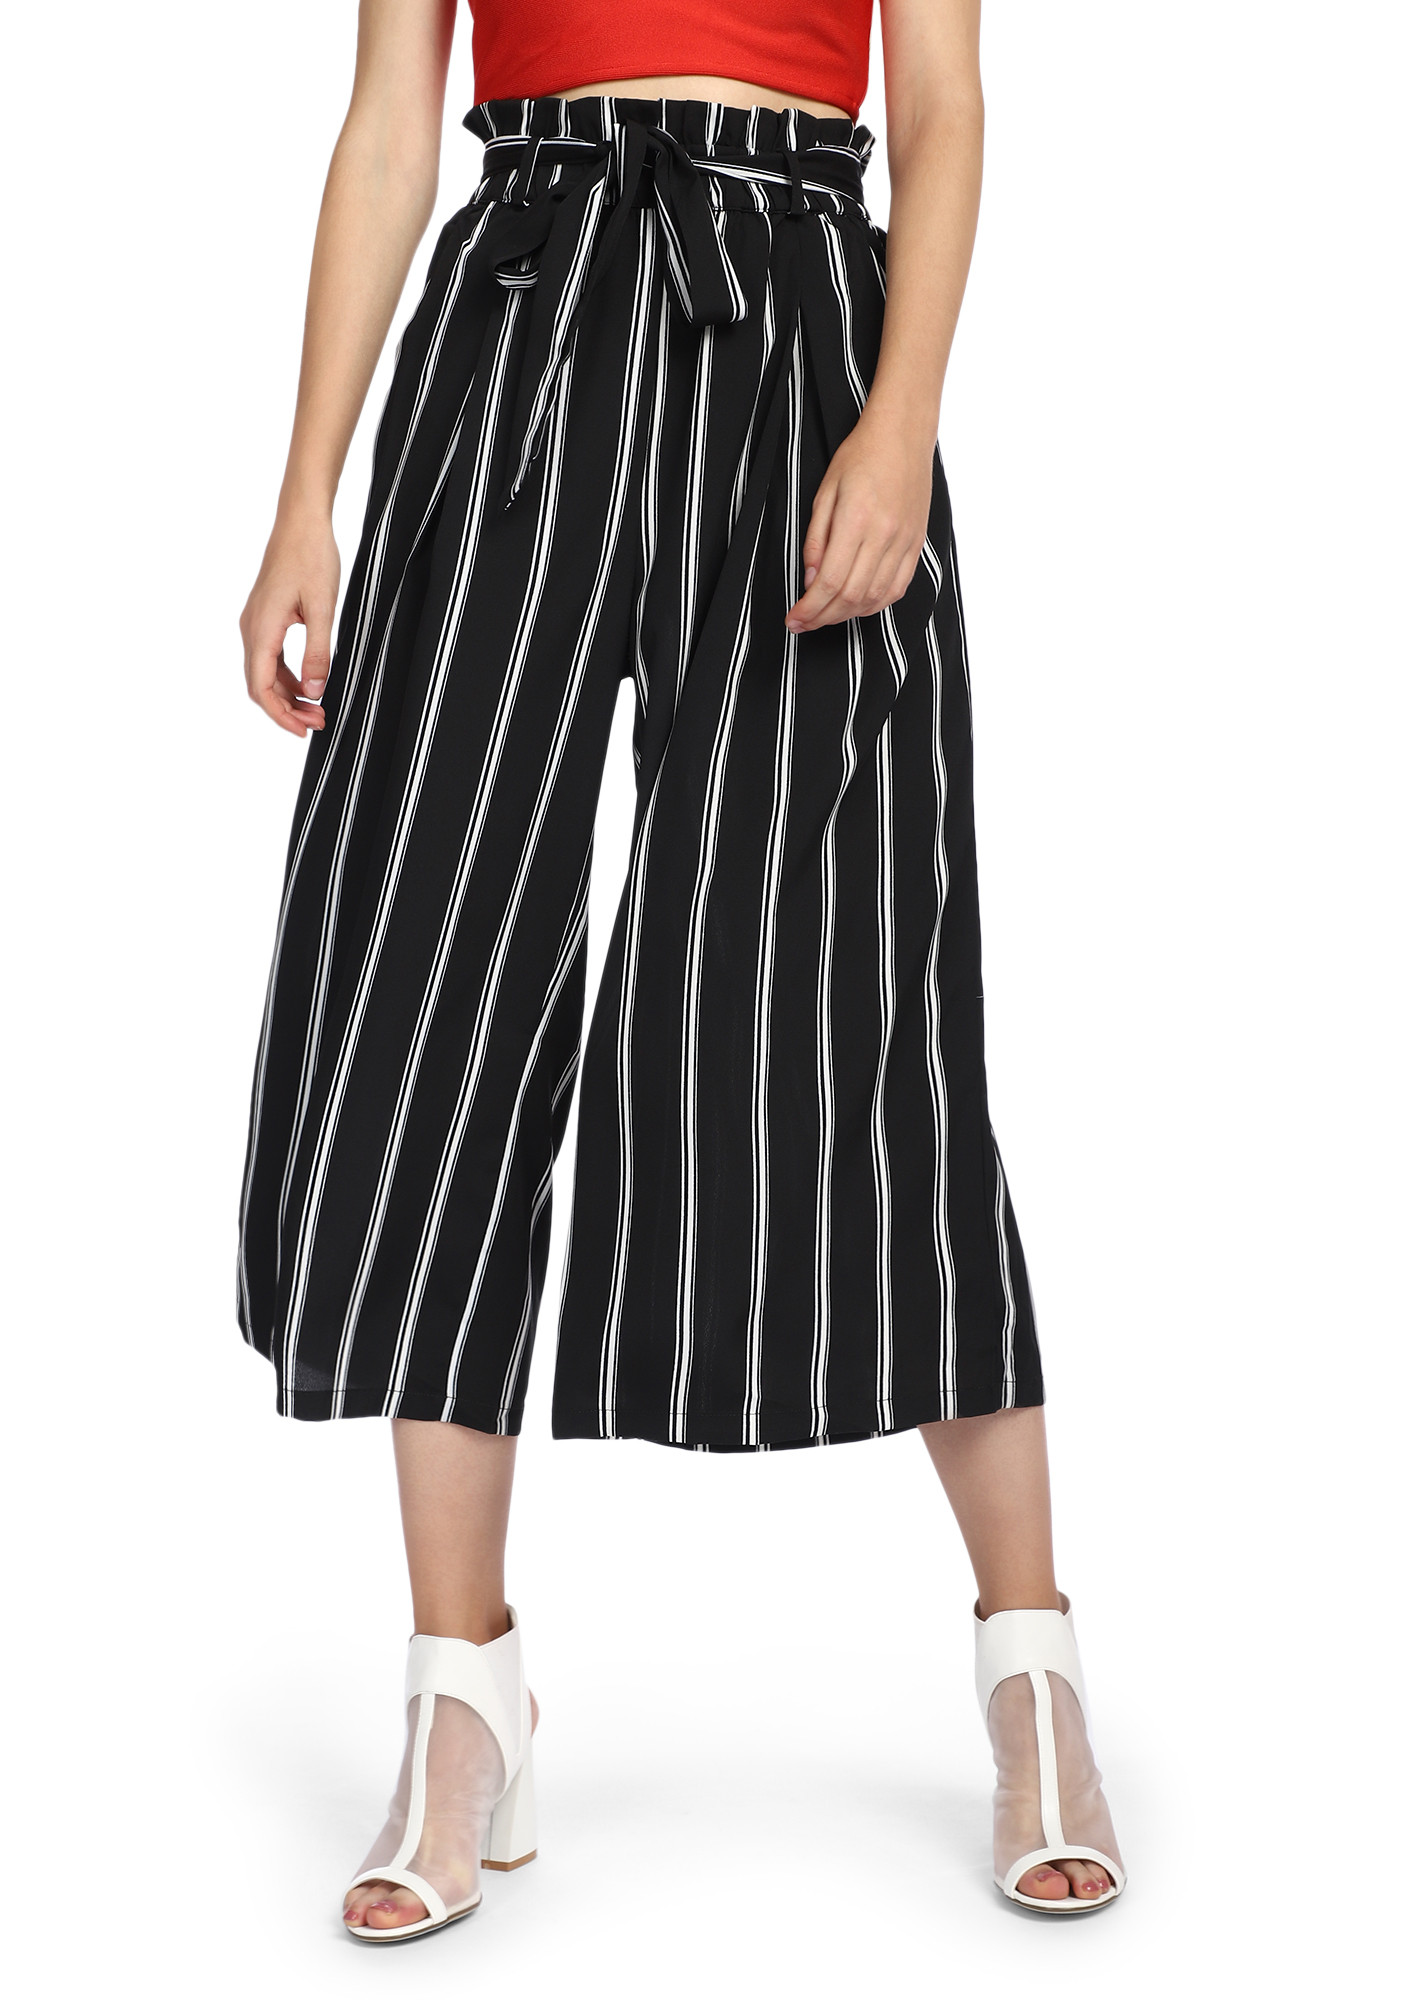 PLAY YOUR CARDS BLACK CULOTTES